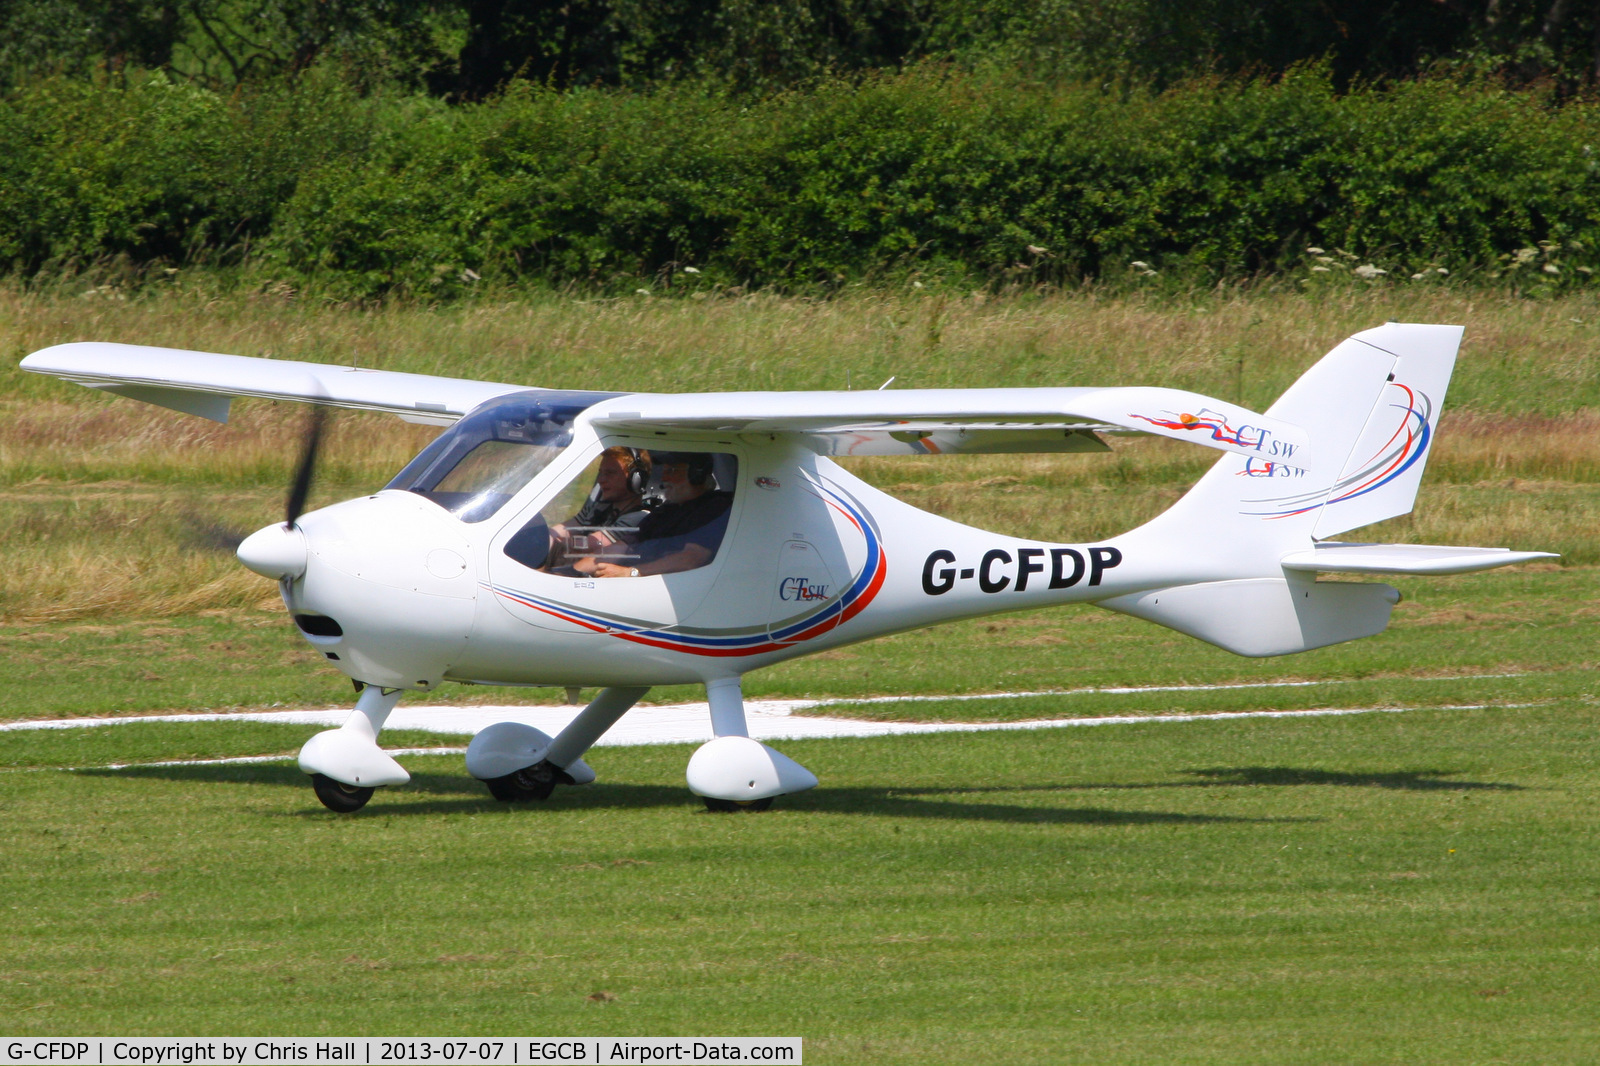 G-CFDP, 2008 Flight Design CTSW C/N 8367, at the Barton open day and fly in